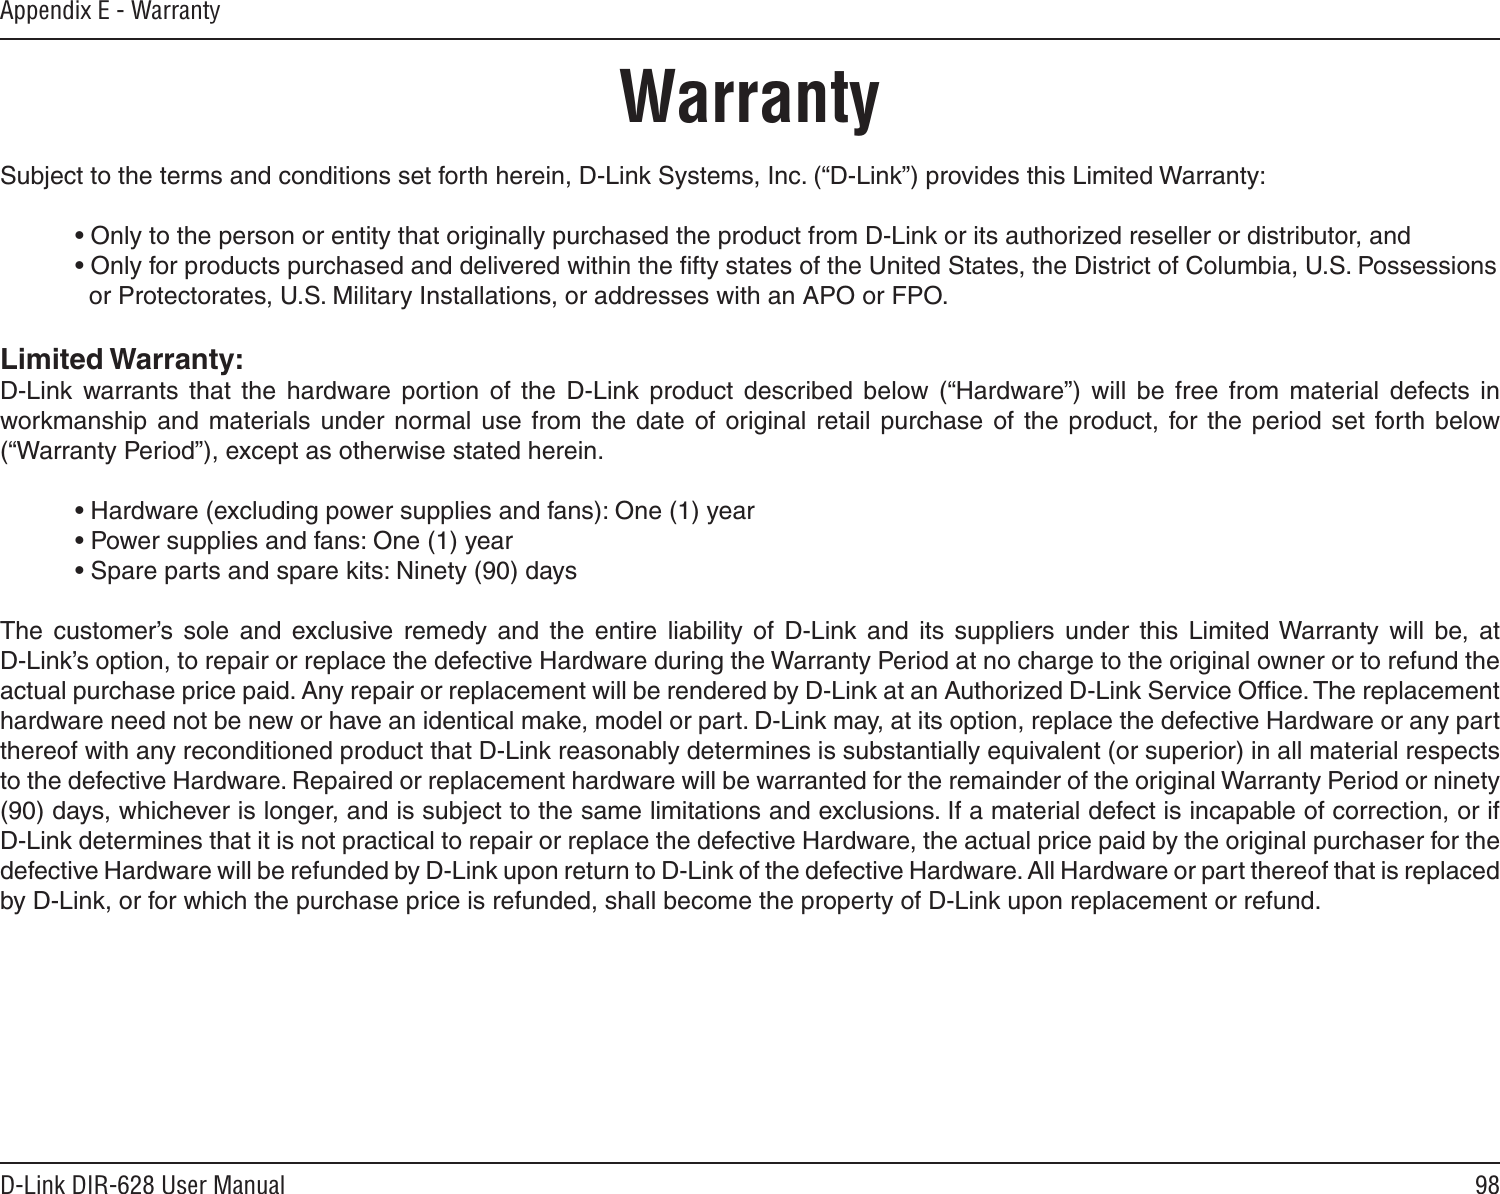 98D-Link DIR-628 User ManualAppendix E - WarrantyWarrantySubject to the terms and conditions set forth herein, D-Link Systems, Inc. (“D-Link”) provides this Limited Warranty:  • Only to the person or entity that originally purchased the product from D-Link or its authorized reseller or distributor, and  • Only for products purchased and delivered within the ﬁfty states of the United States, the District of Columbia, U.S. Possessions      or Protectorates, U.S. Military Installations, or addresses with an APO or FPO.Limited Warranty:D-Link  warrants  that  the  hardware portion  of  the  D-Link  product  described  below  (“Hardware”)  will  be  free  from  material  defects  in workmanship  and  materials  under  normal  use  from  the  date  of  original  retail  purchase  of  the  product,  for the period set forth below (“Warranty Period”), except as otherwise stated herein.  • Hardware (excluding power supplies and fans): One (1) year  • Power supplies and fans: One (1) year  • Spare parts and spare kits: Ninety (90) daysThe  customer’s  sole  and  exclusive  remedy  and  the  entire  liability  of  D-Link  and  its  suppliers  under  this  Limited Warranty  will  be,  at  D-Link’s option, to repair or replace the defective Hardware during the Warranty Period at no charge to the original owner or to refund the actual purchase price paid. Any repair or replacement will be rendered by D-Link at an Authorized D-Link Service Ofﬁce. The replacement hardware need not be new or have an identical make, model or part. D-Link may, at its option, replace the defective Hardware or any part thereof with any reconditioned product that D-Link reasonably determines is substantially equivalent (or superior) in all material respects to the defective Hardware. Repaired or replacement hardware will be warranted for the remainder of the original Warranty Period or ninety (90) days, whichever is longer, and is subject to the same limitations and exclusions. If a material defect is incapable of correction, or if D-Link determines that it is not practical to repair or replace the defective Hardware, the actual price paid by the original purchaser for the defective Hardware will be refunded by D-Link upon return to D-Link of the defective Hardware. All Hardware or part thereof that is replaced by D-Link, or for which the purchase price is refunded, shall become the property of D-Link upon replacement or refund.